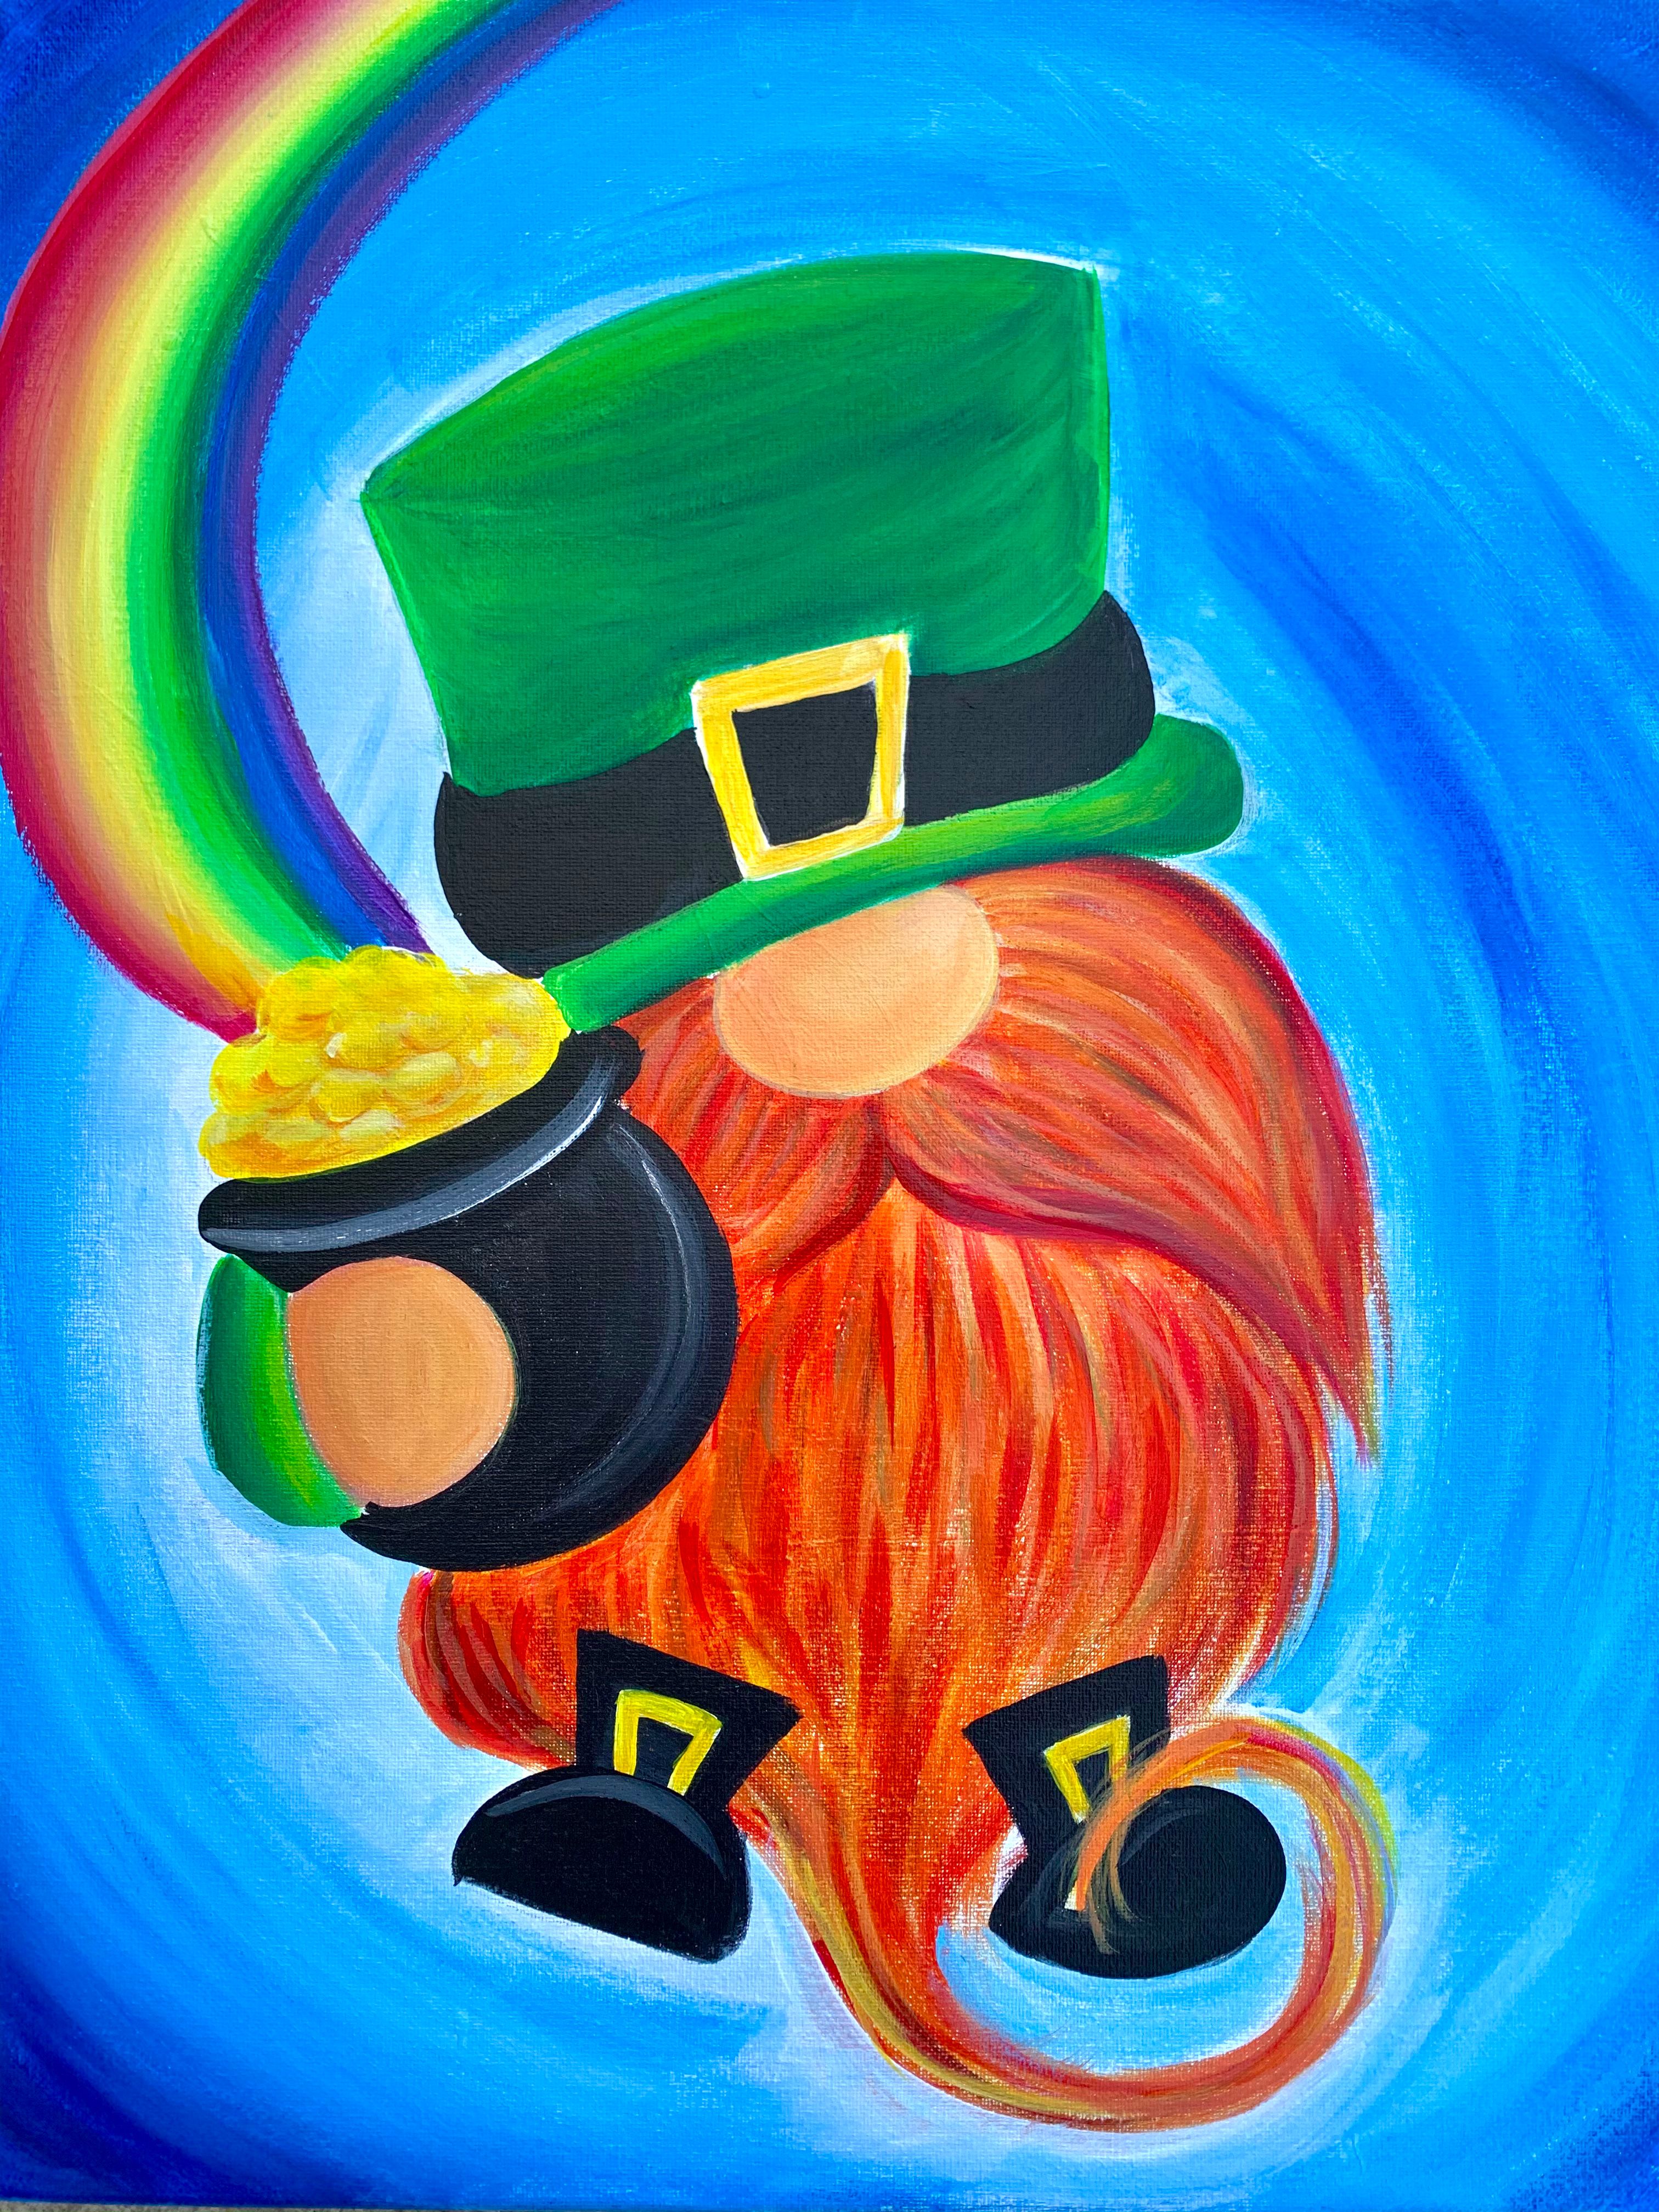 A Lucky leprechaun Gnome experience project by Yaymaker